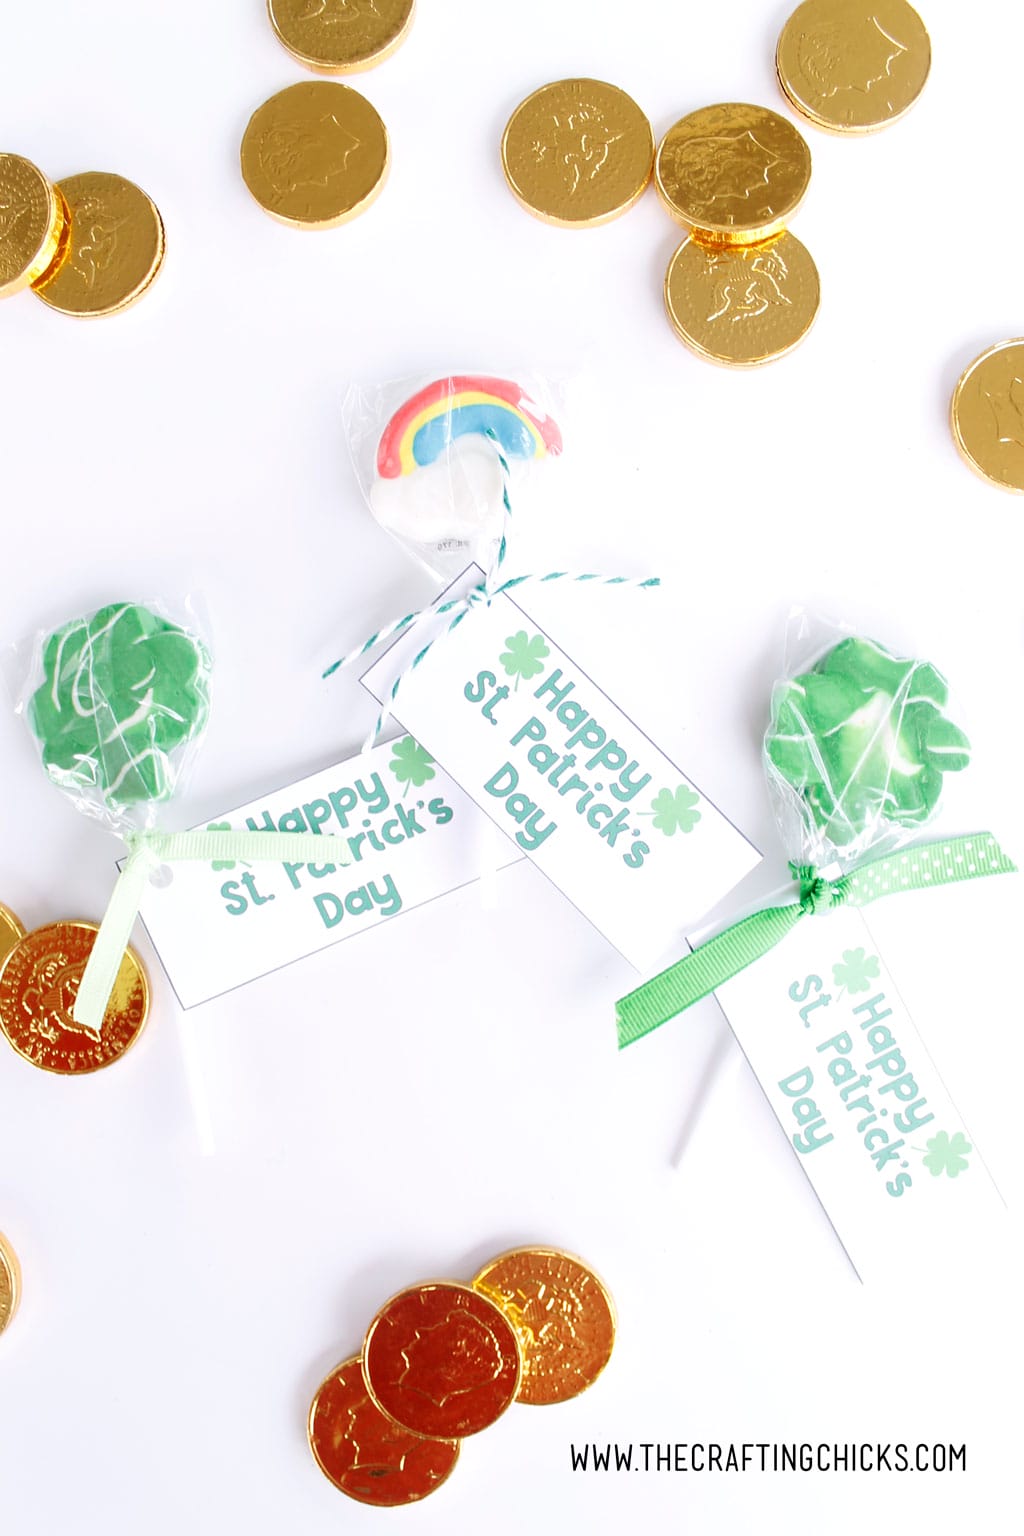 Are you looking for a way to show your friends and family you're lucky to have them this St. Patrick's Day? These adorable St. Patrick's Day Treat Tags are the perfect way. Print them out and add them to any gift.